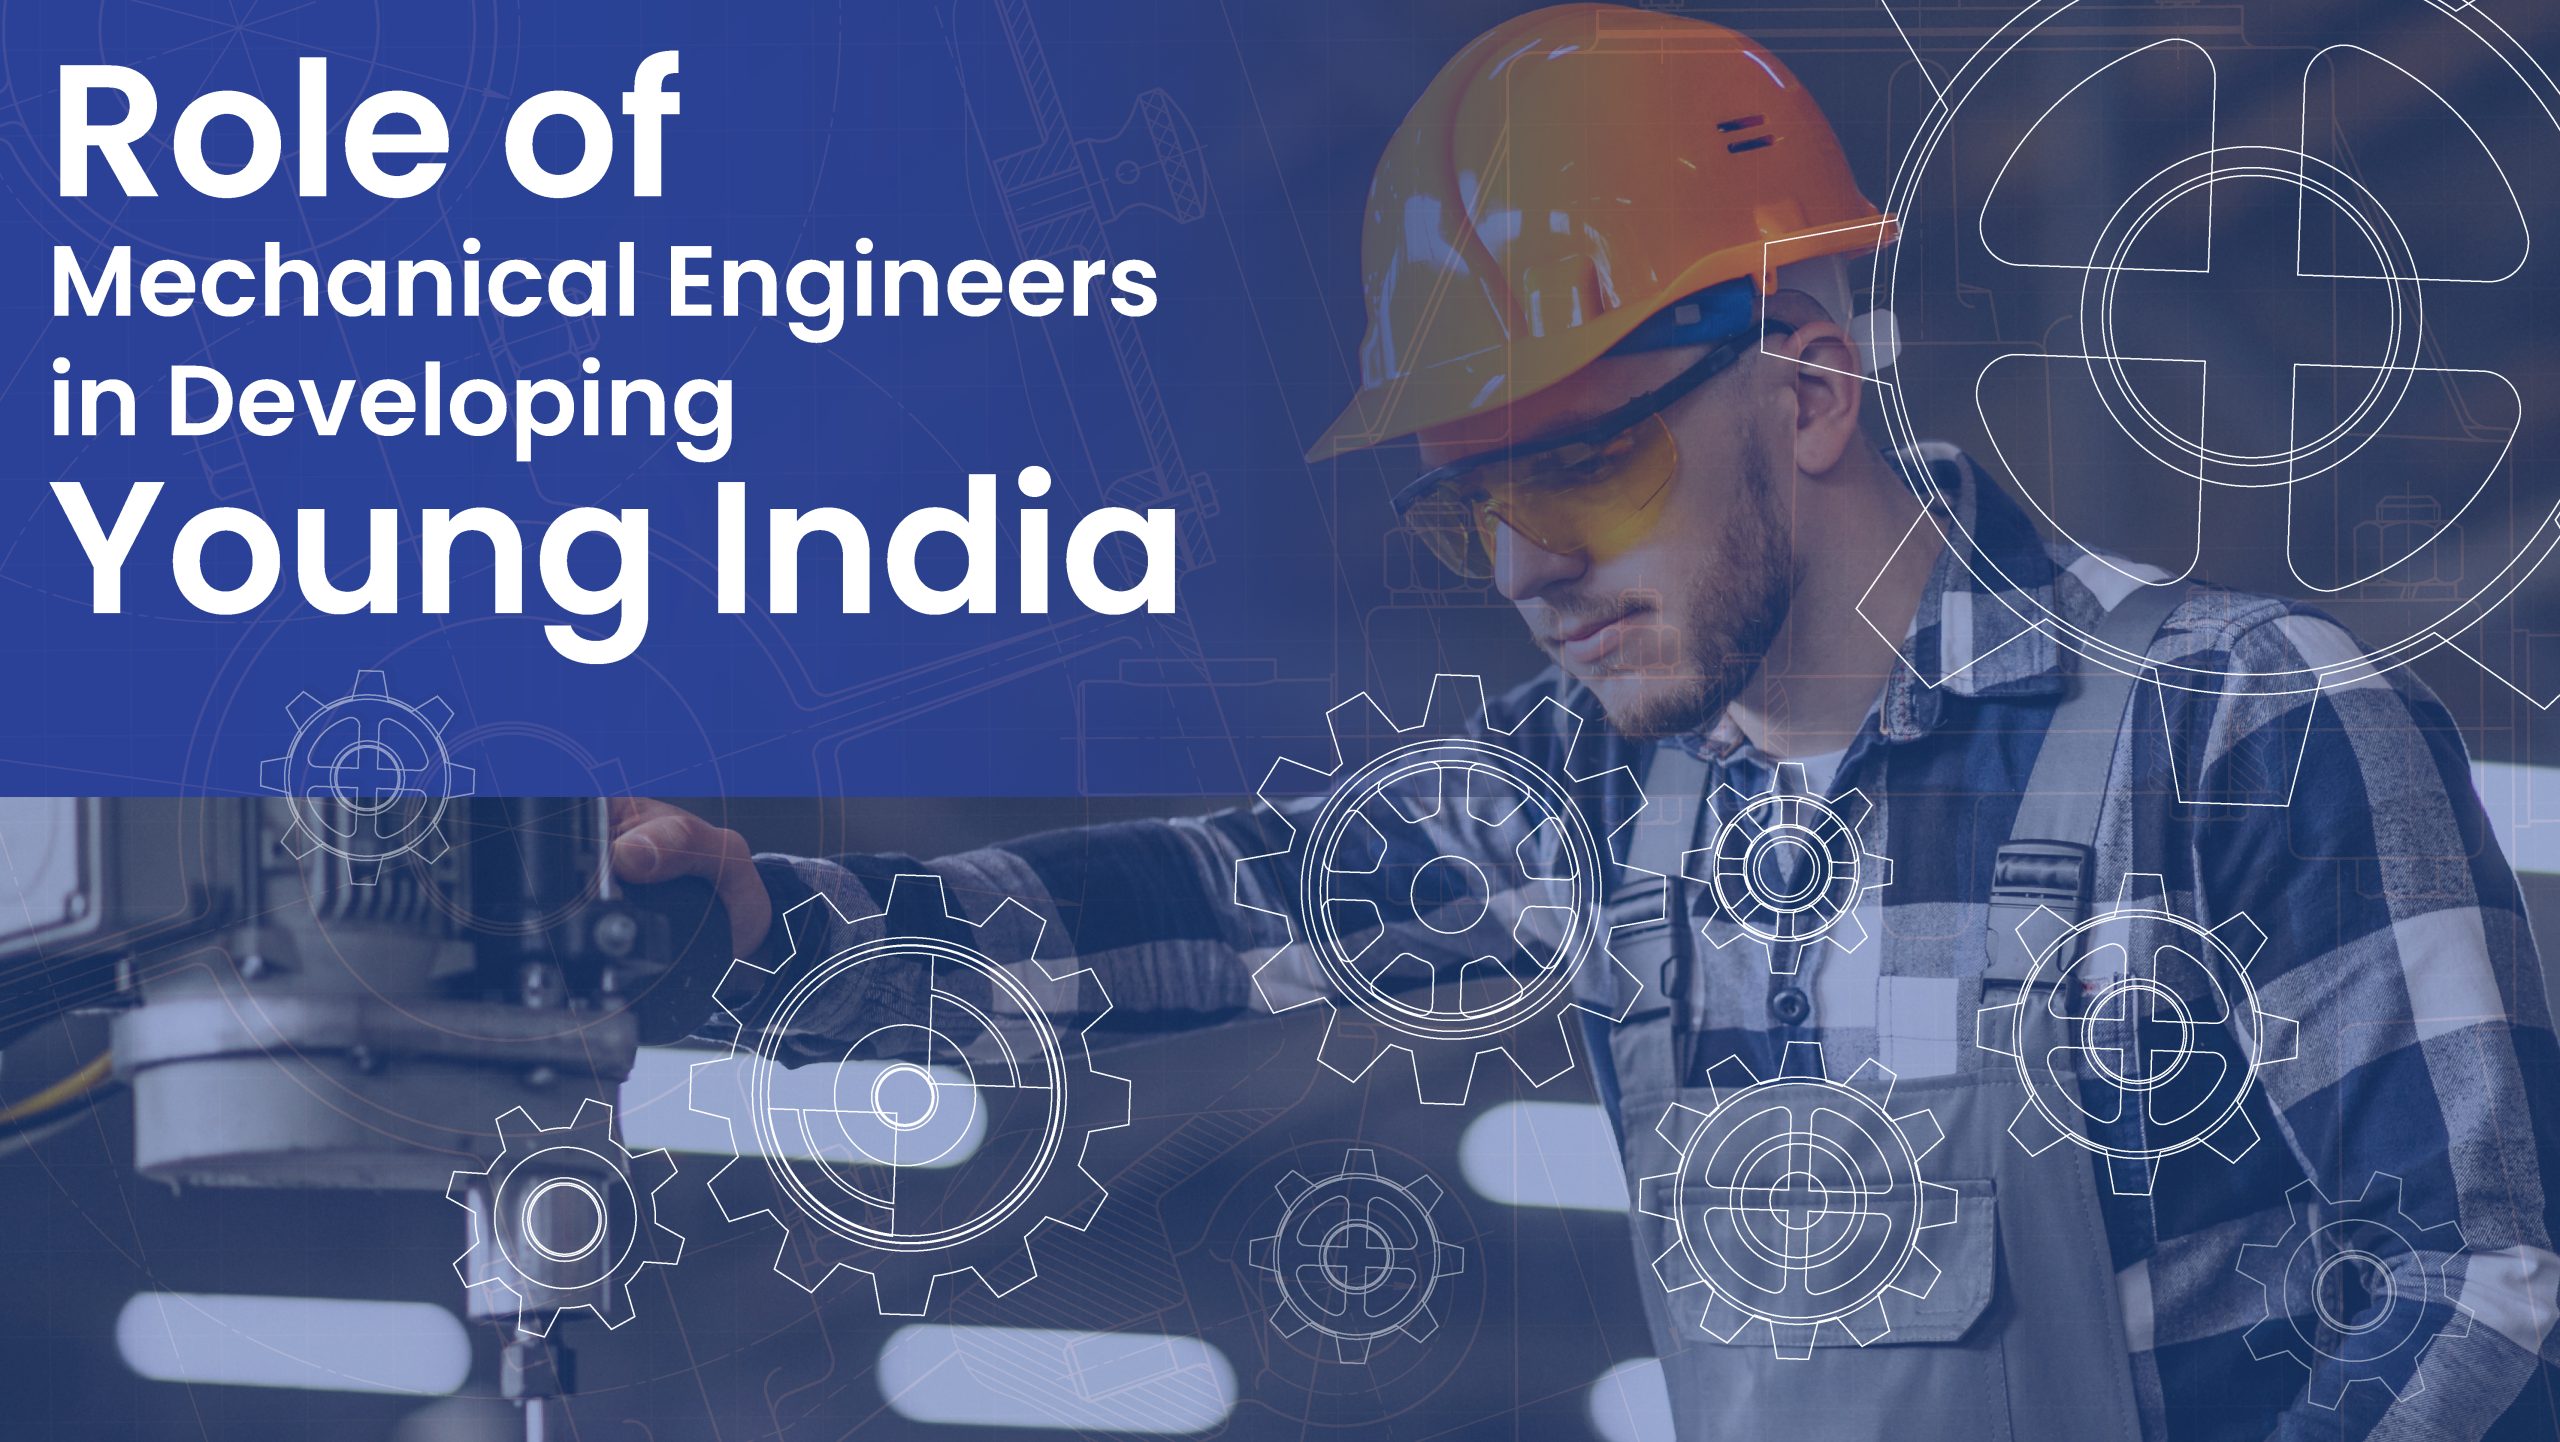 Role of Mechanical Engineers in Developing Young India. New Horizon